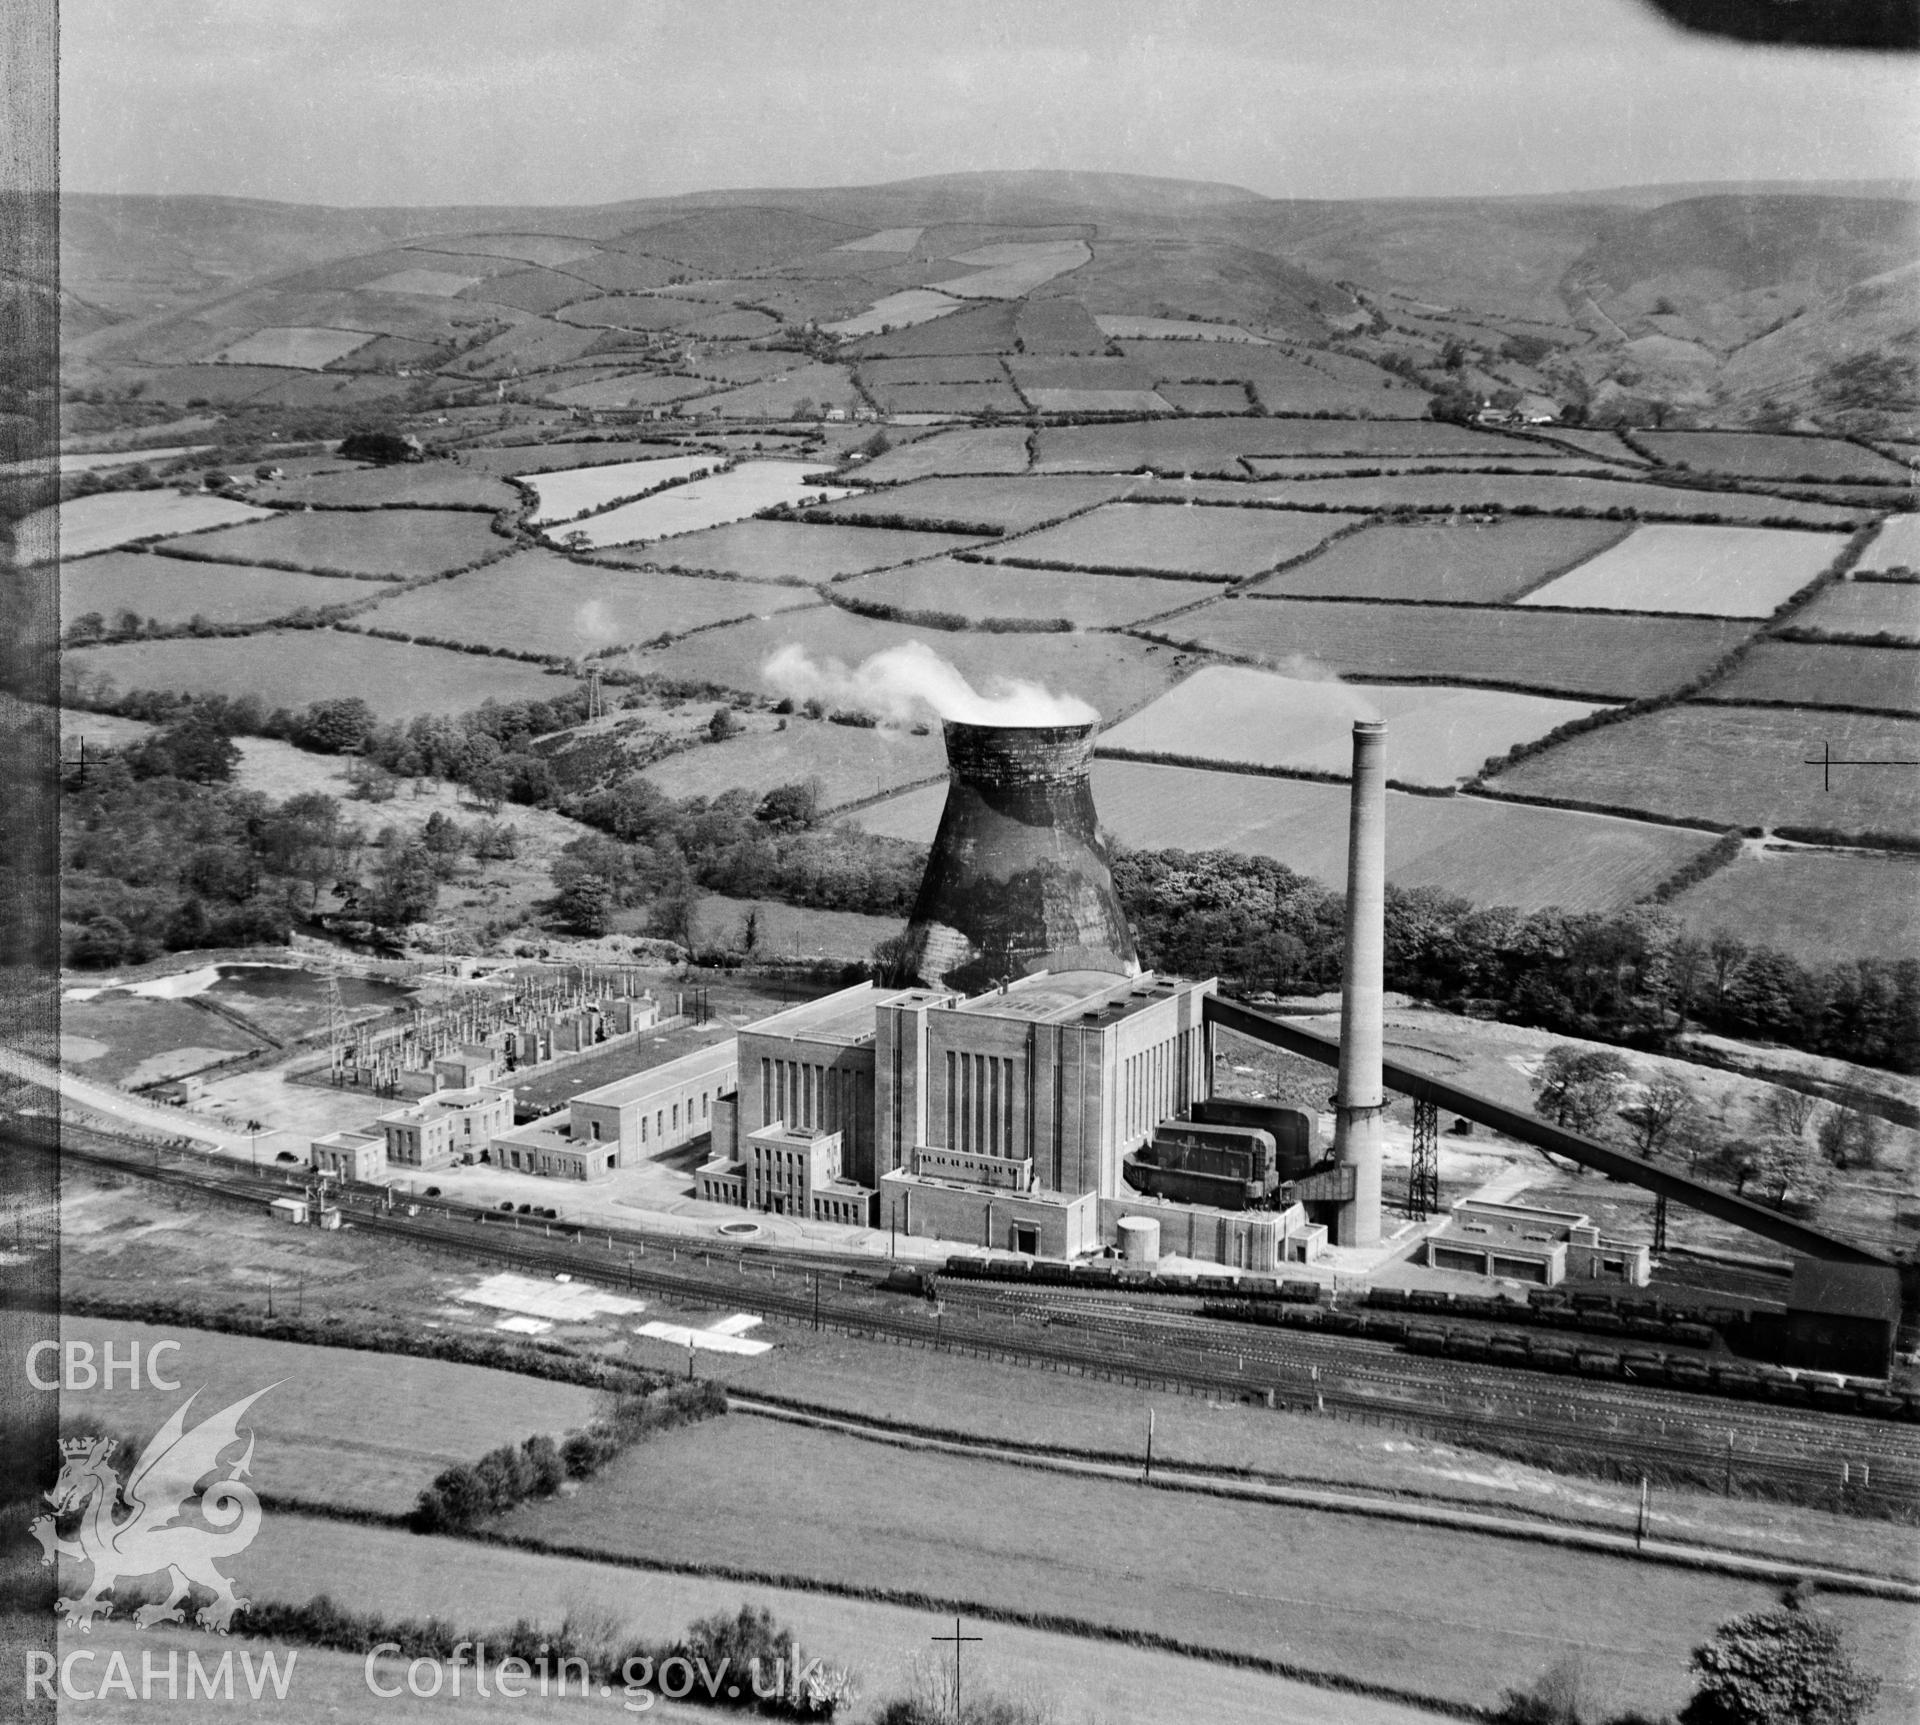 View labelled "South Wales Electric Power Co Bridgend Site", showing Llynfi Valley Power station with camoflaged cooling tower.